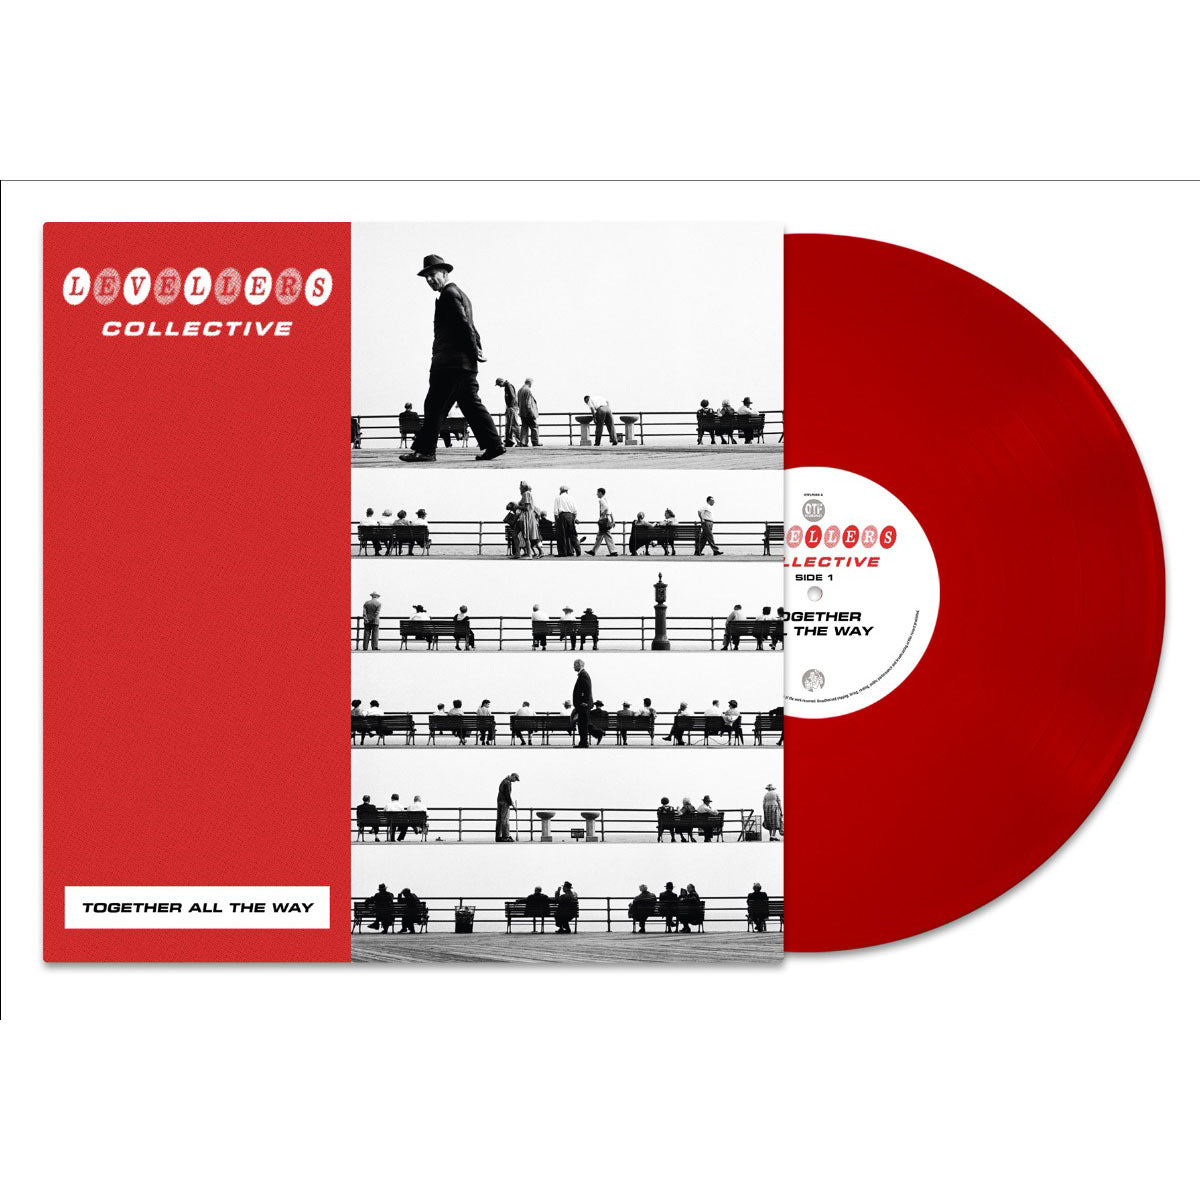 Together All The Way: Limited Red Vinyl LP